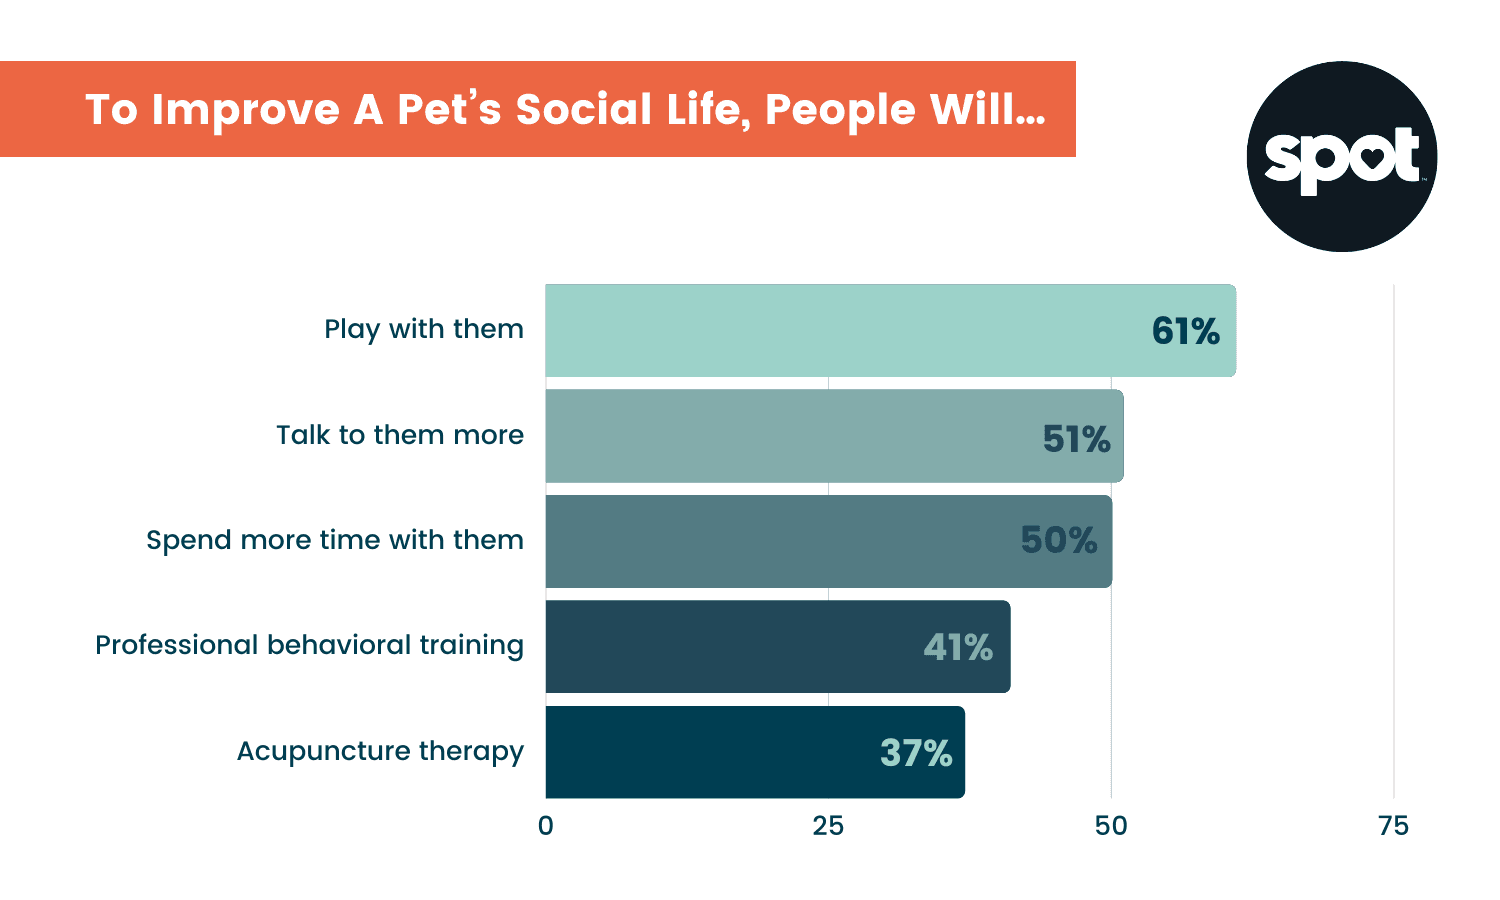 Bar graph showing actions people take to improve a pet's social life with "Play with them" at 61%.